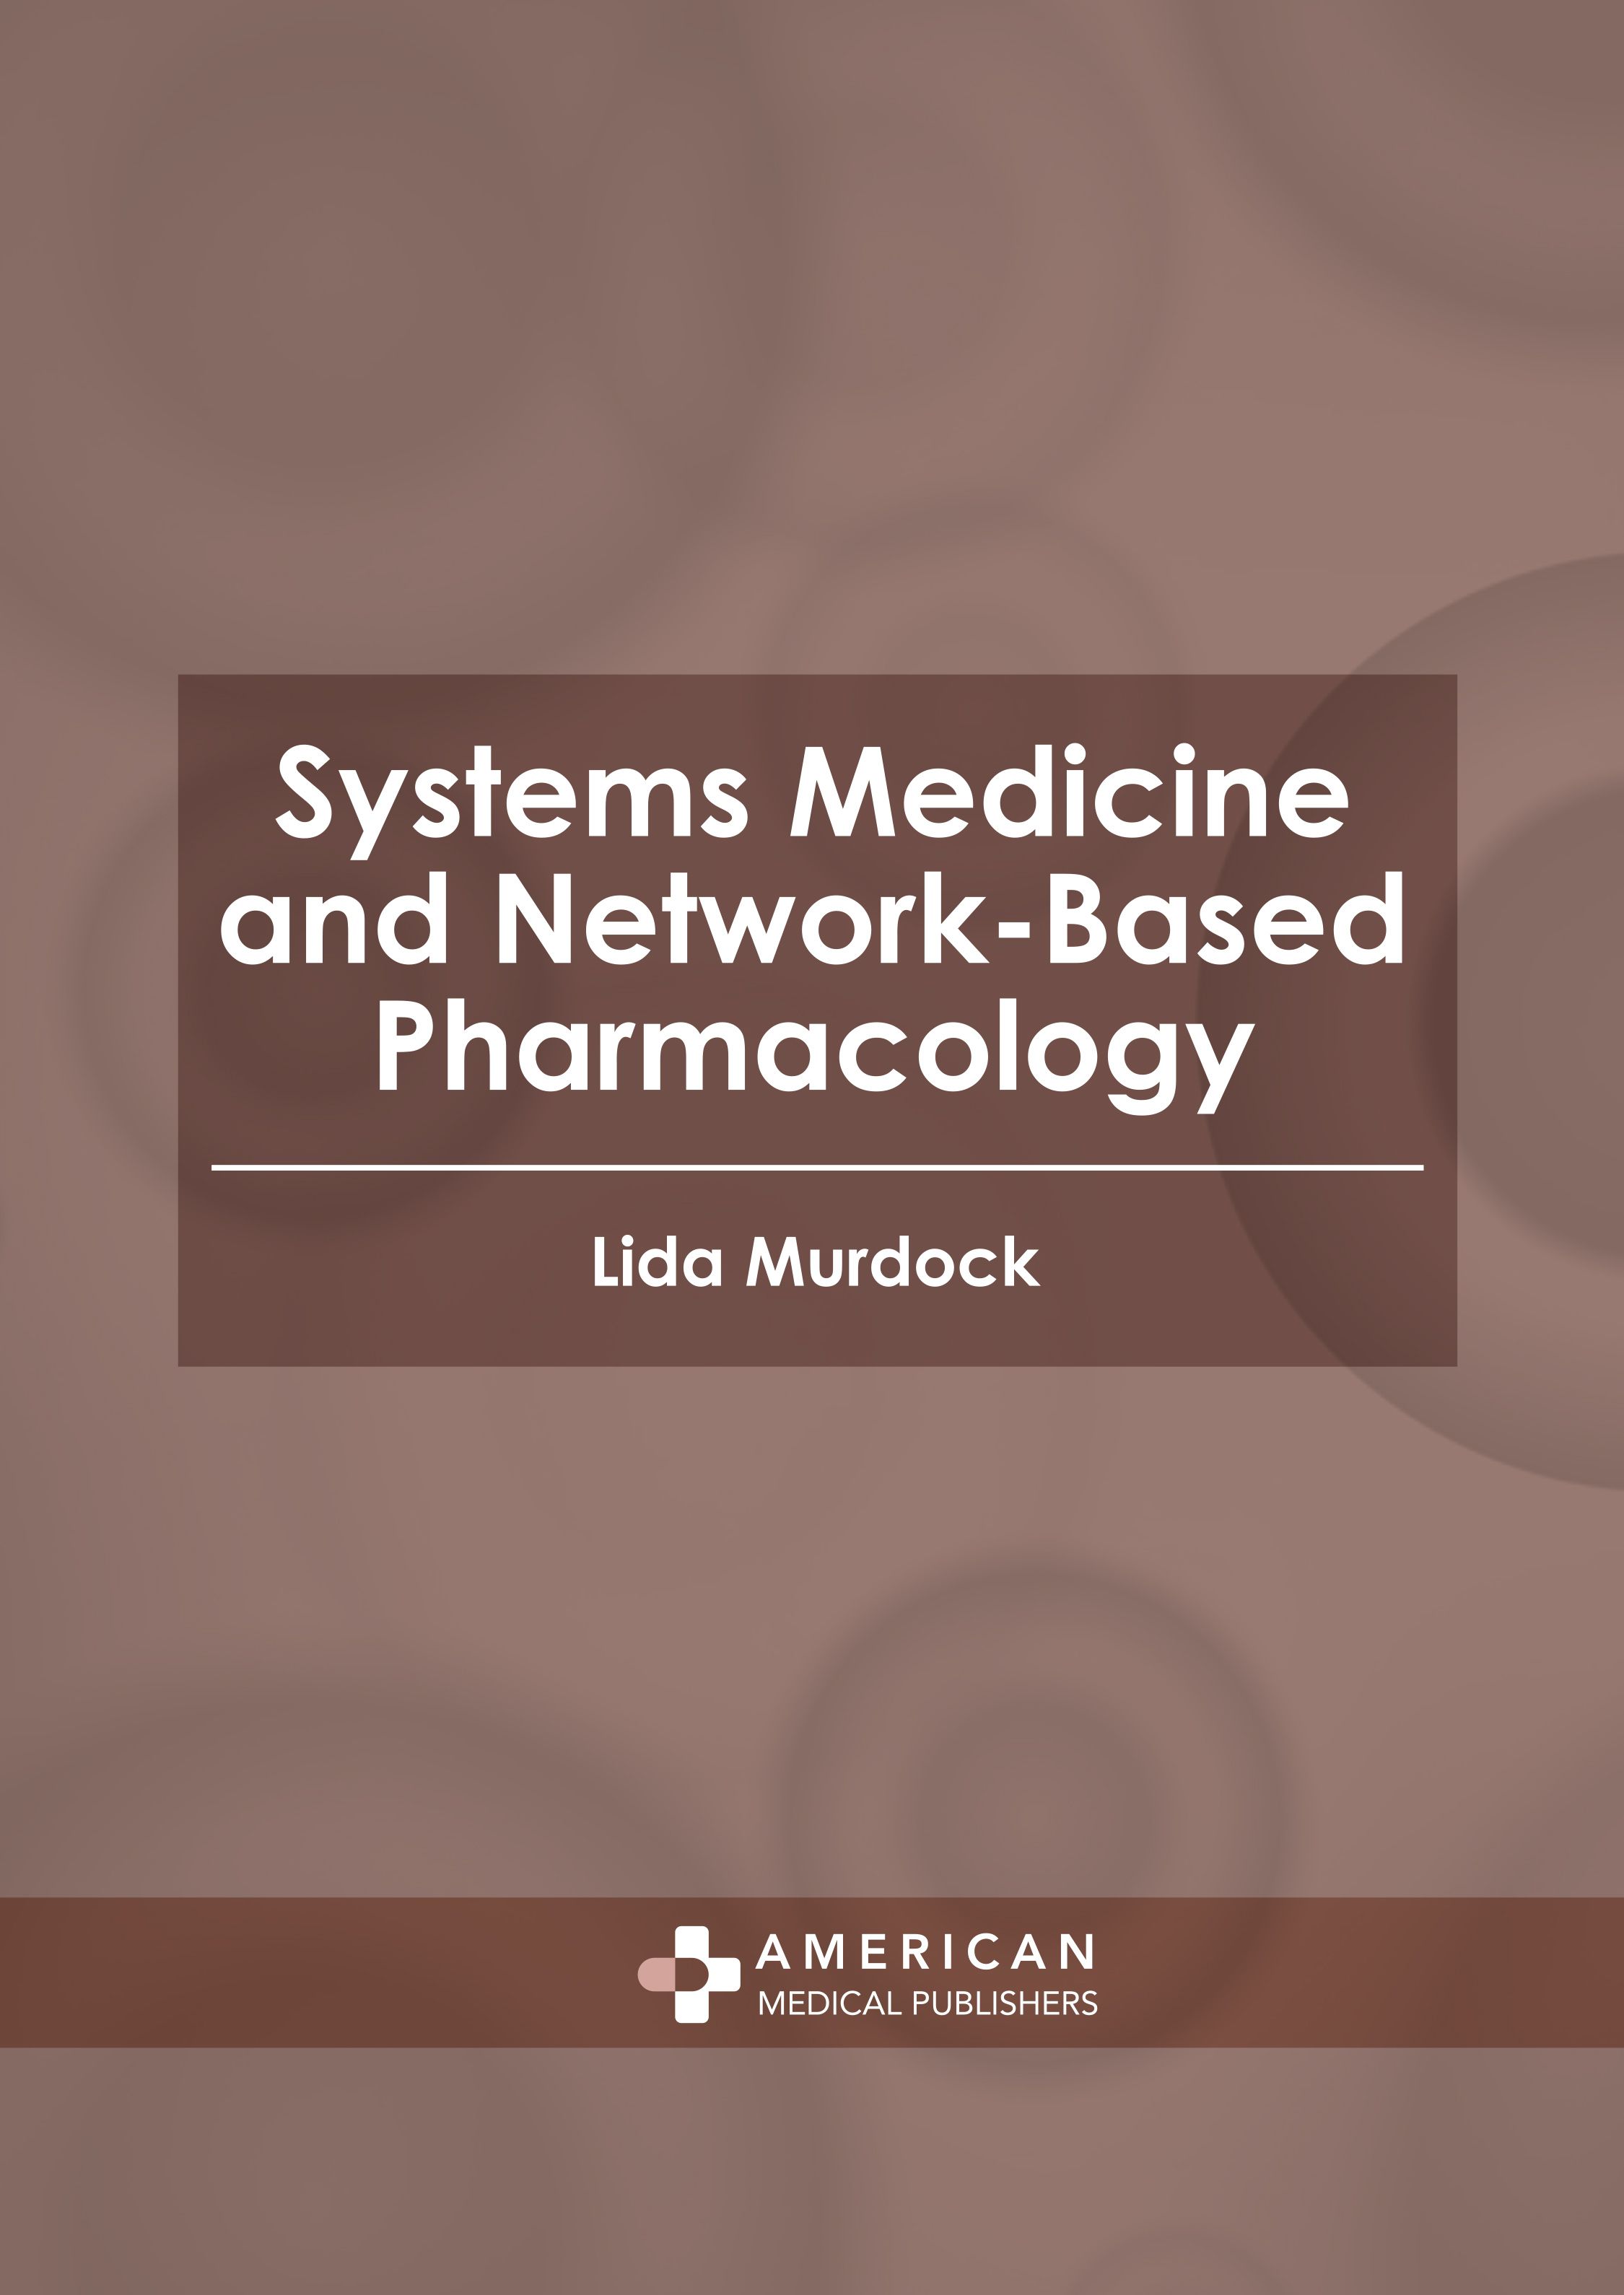 SYSTEMS MEDICINE AND NETWORK-BASED PHARMACOLOGY